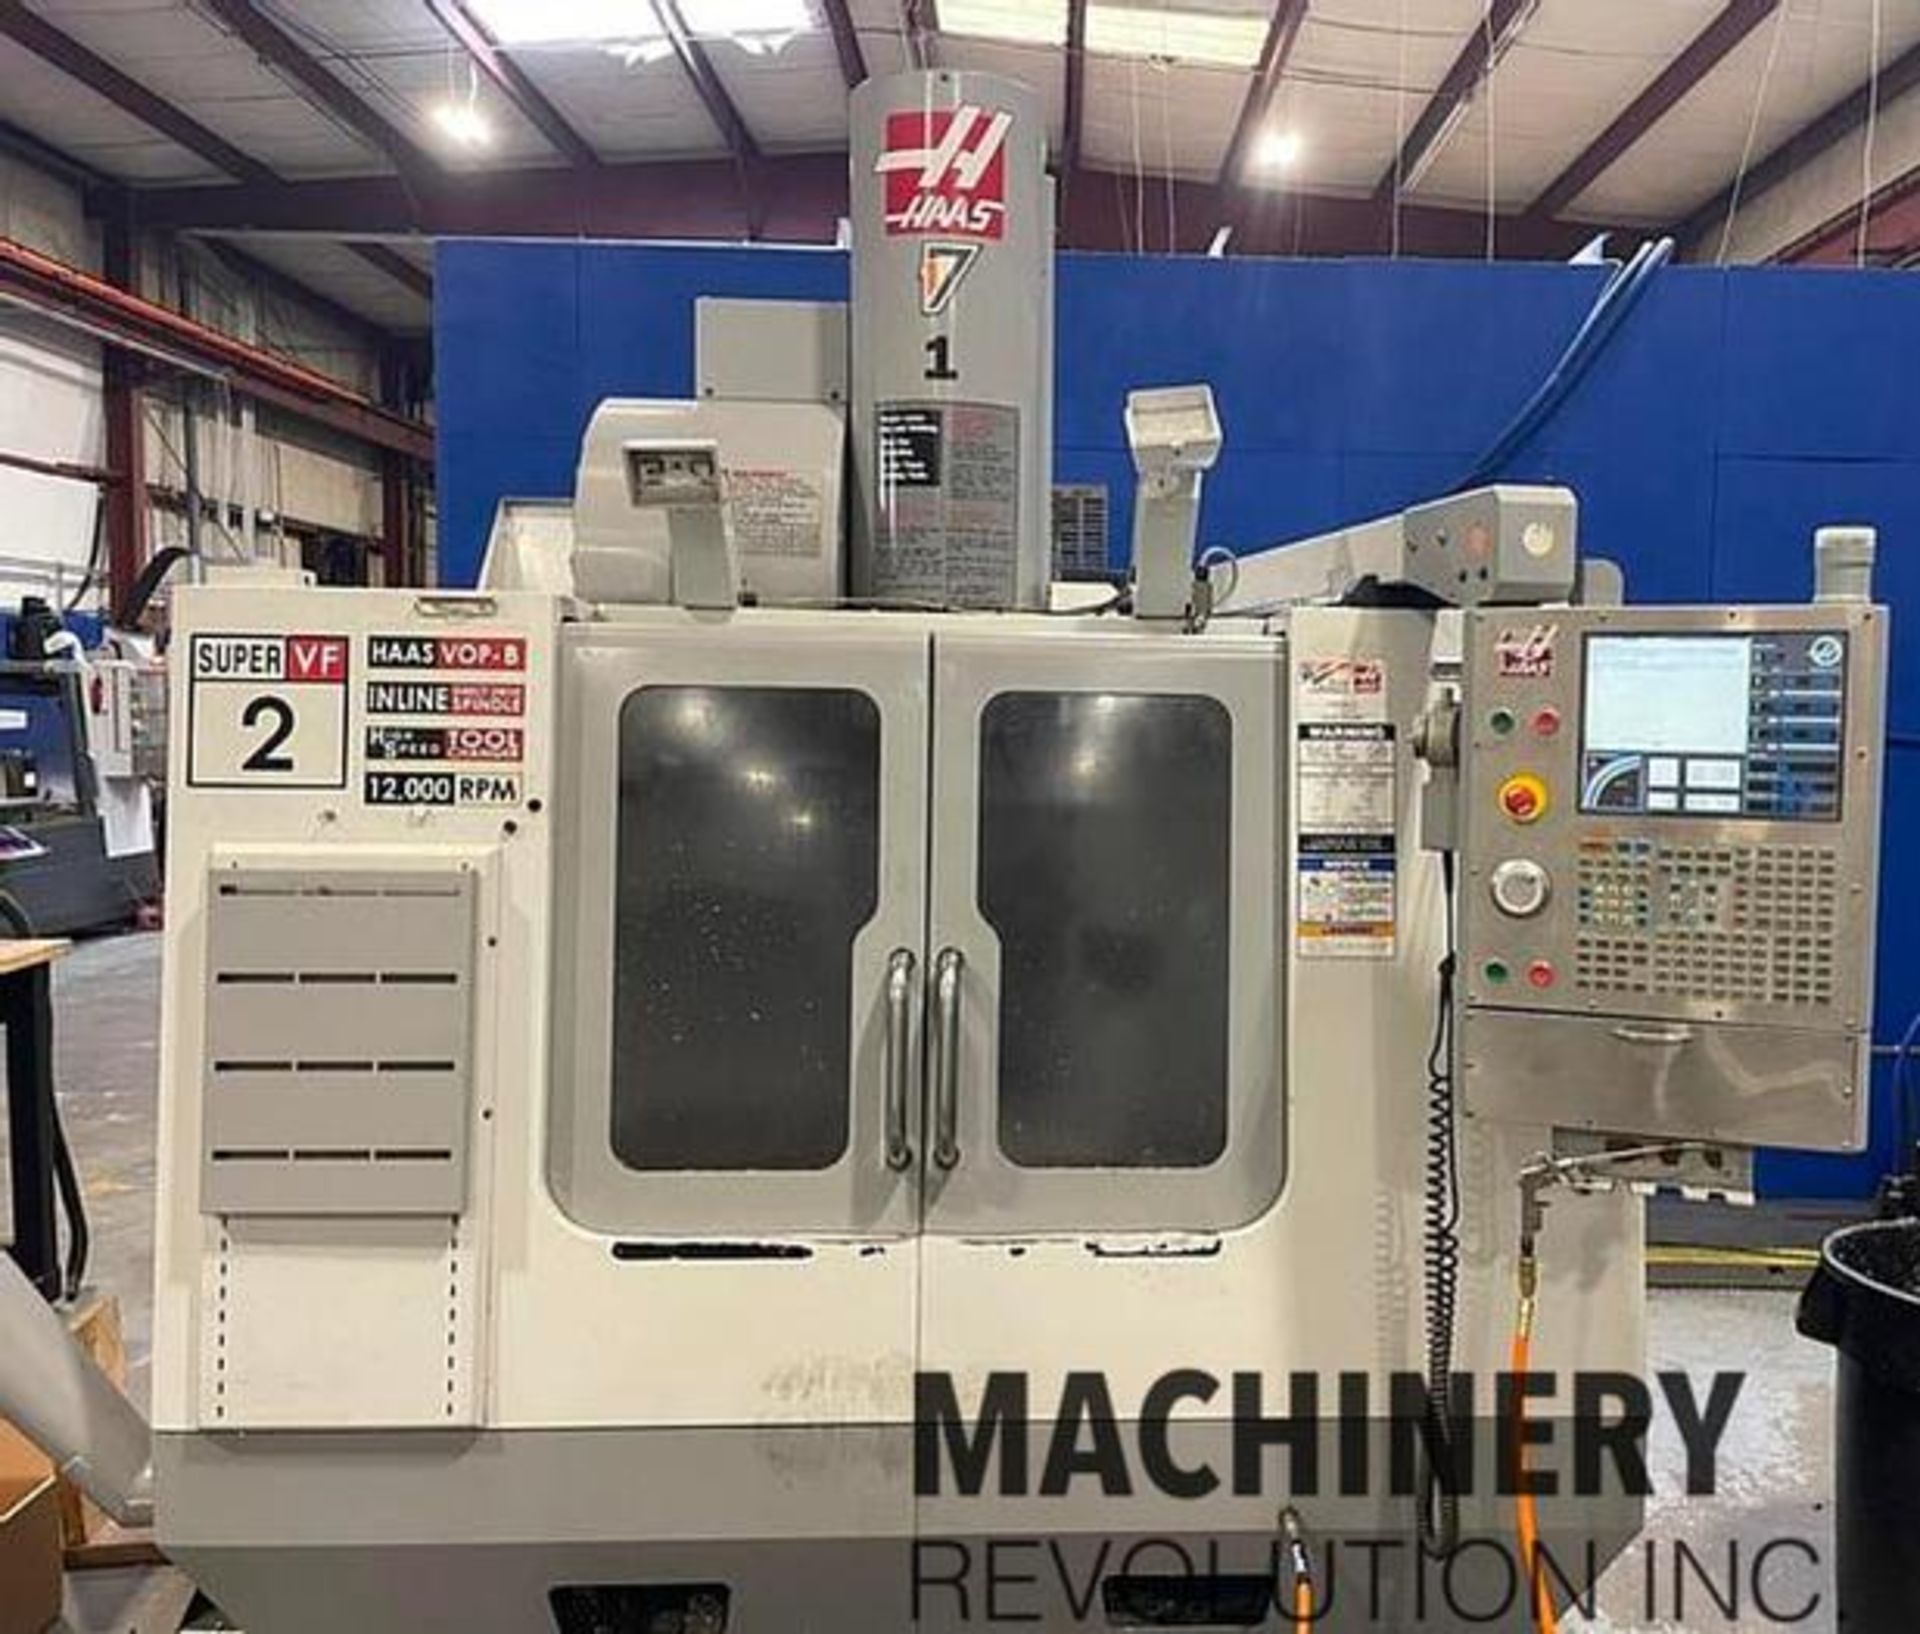 2006 HAAS VF-2SS 4-Axis CNC Vertical Machining Center - Image 10 of 10